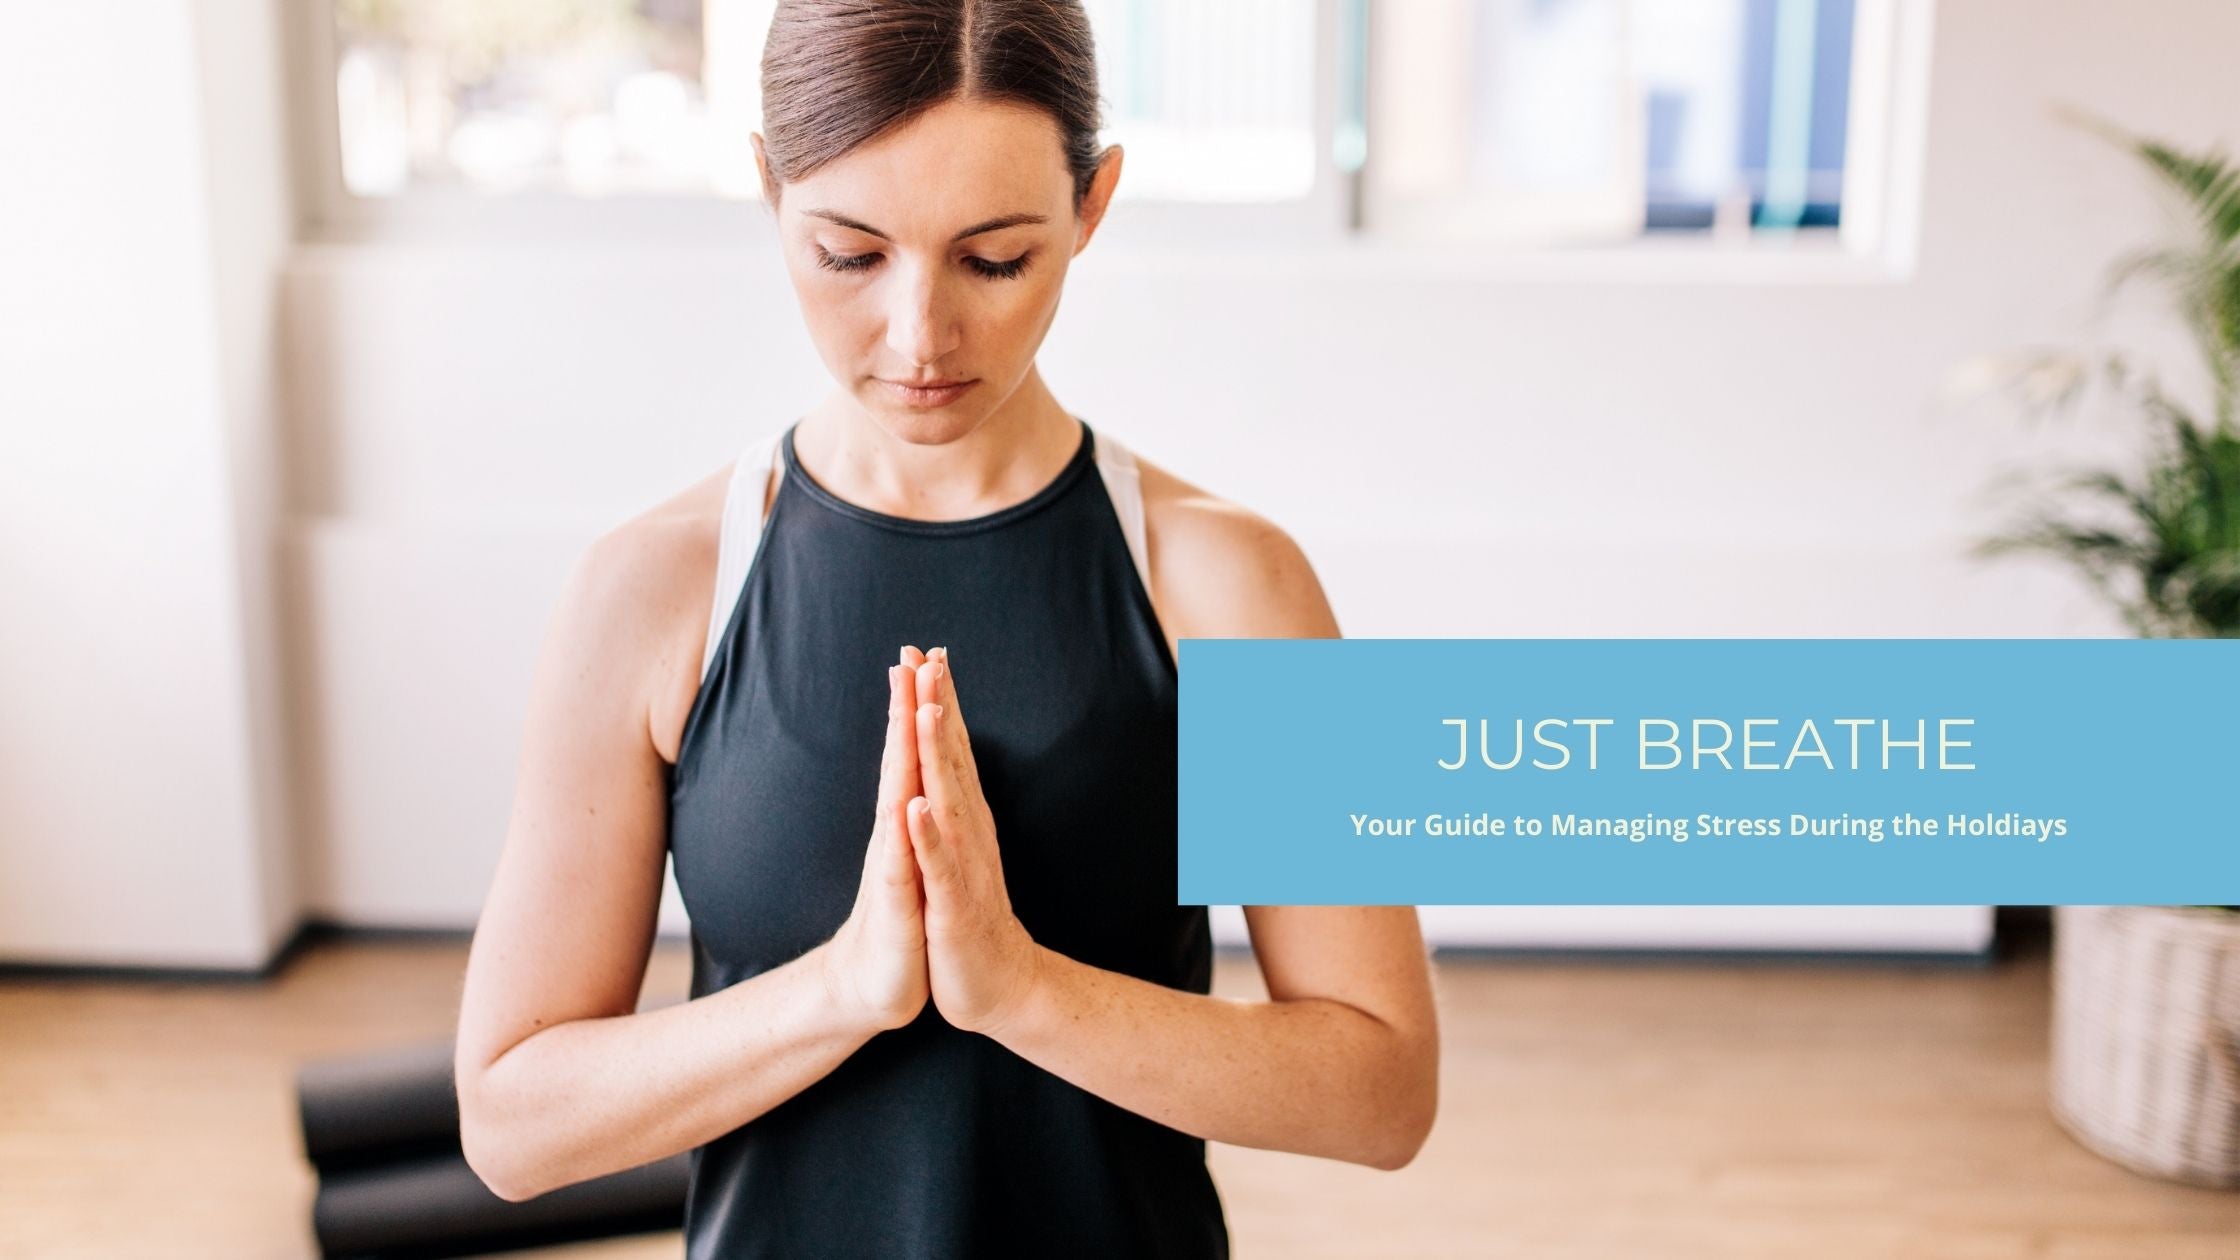 Just Breathe: Your Guide to Managing Stress